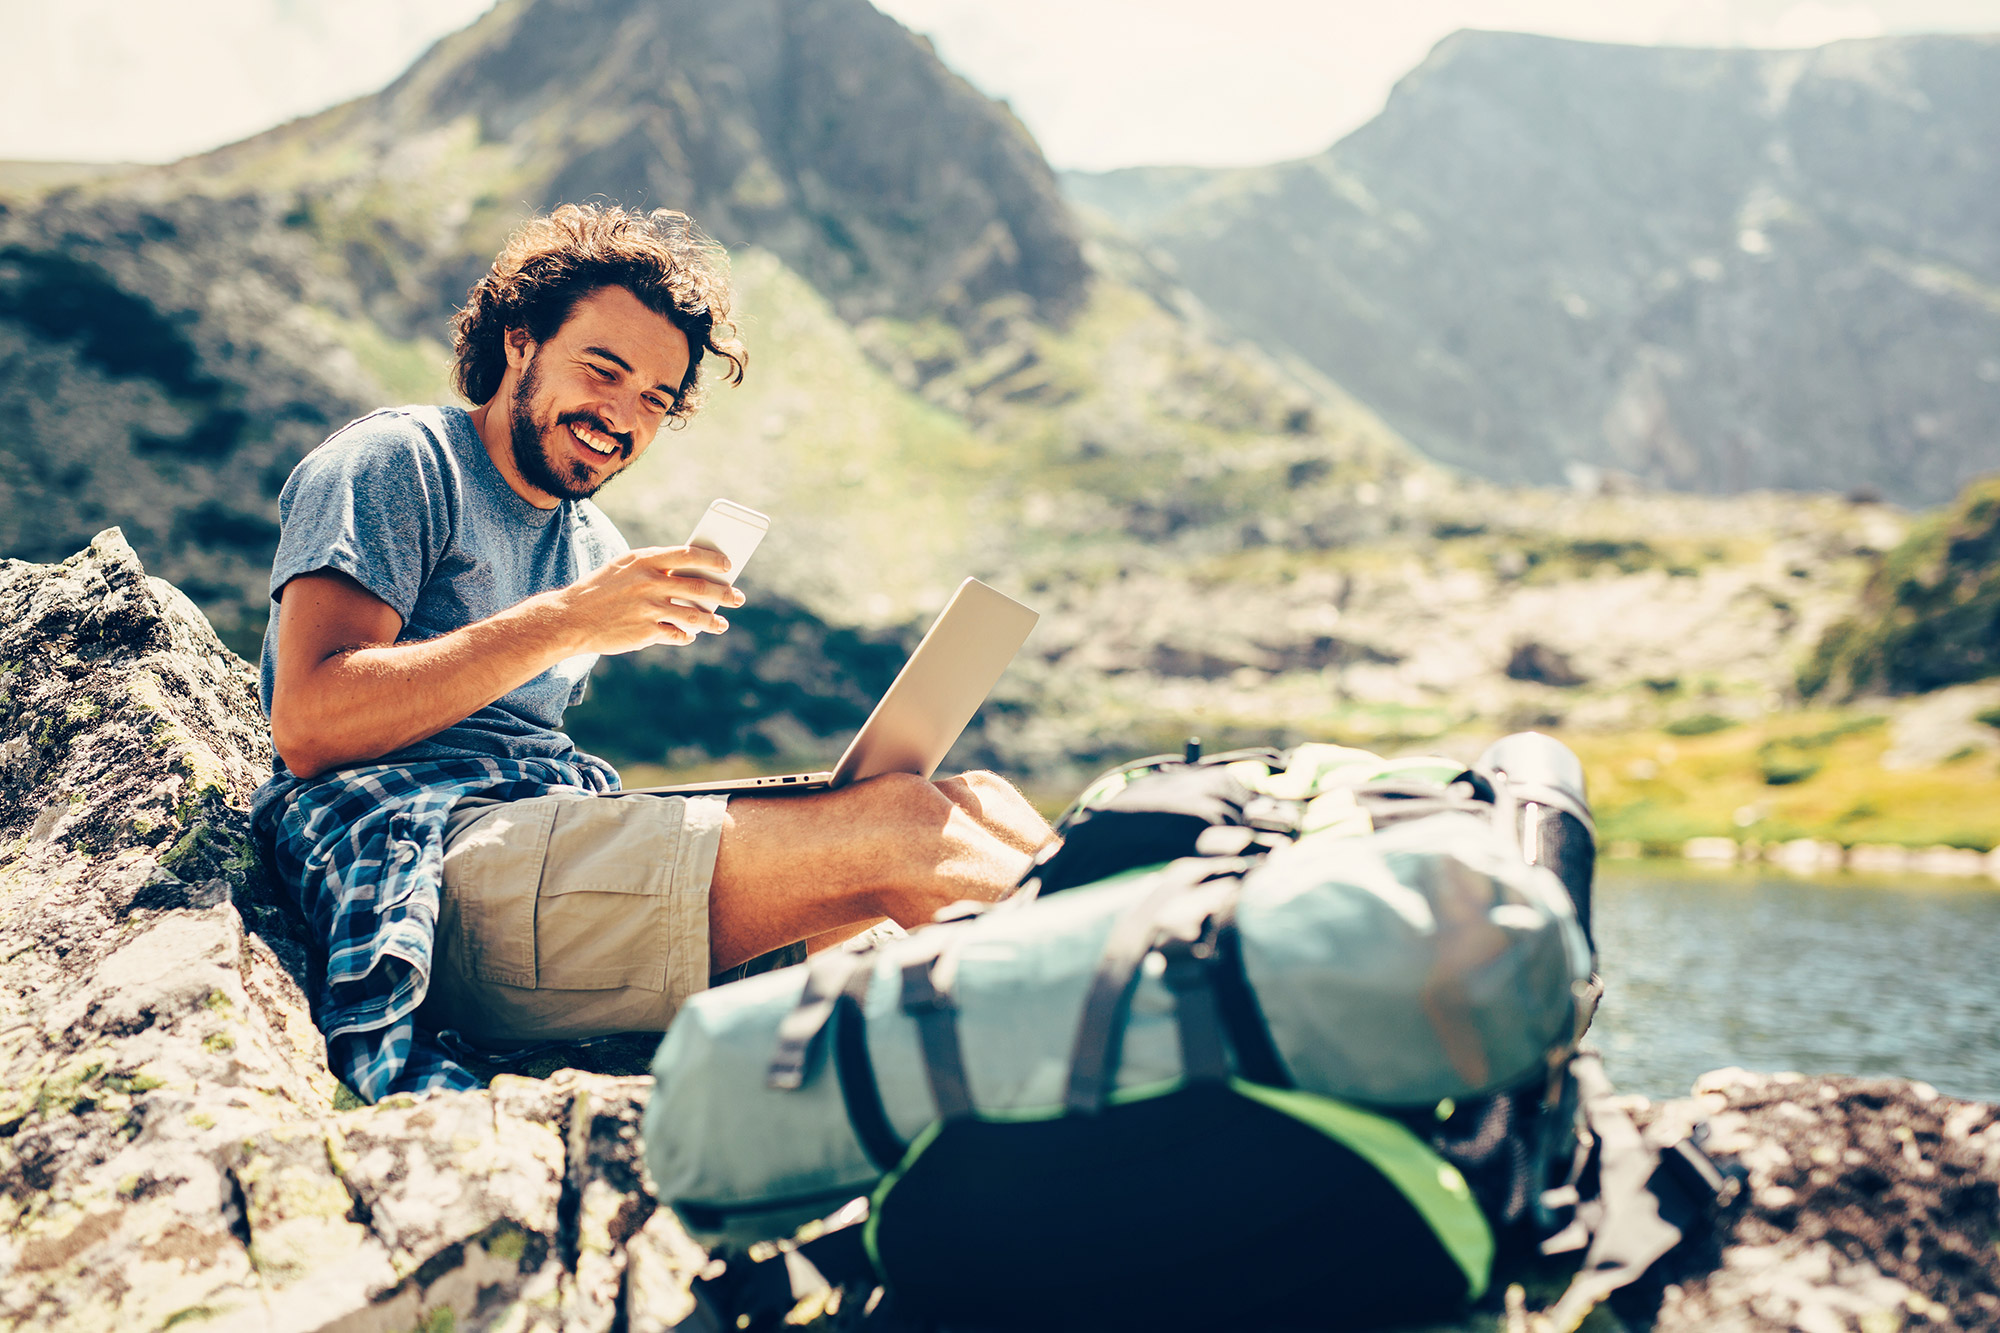 Smiling man with a laptop and smartphone sitting on a rocky mountain.